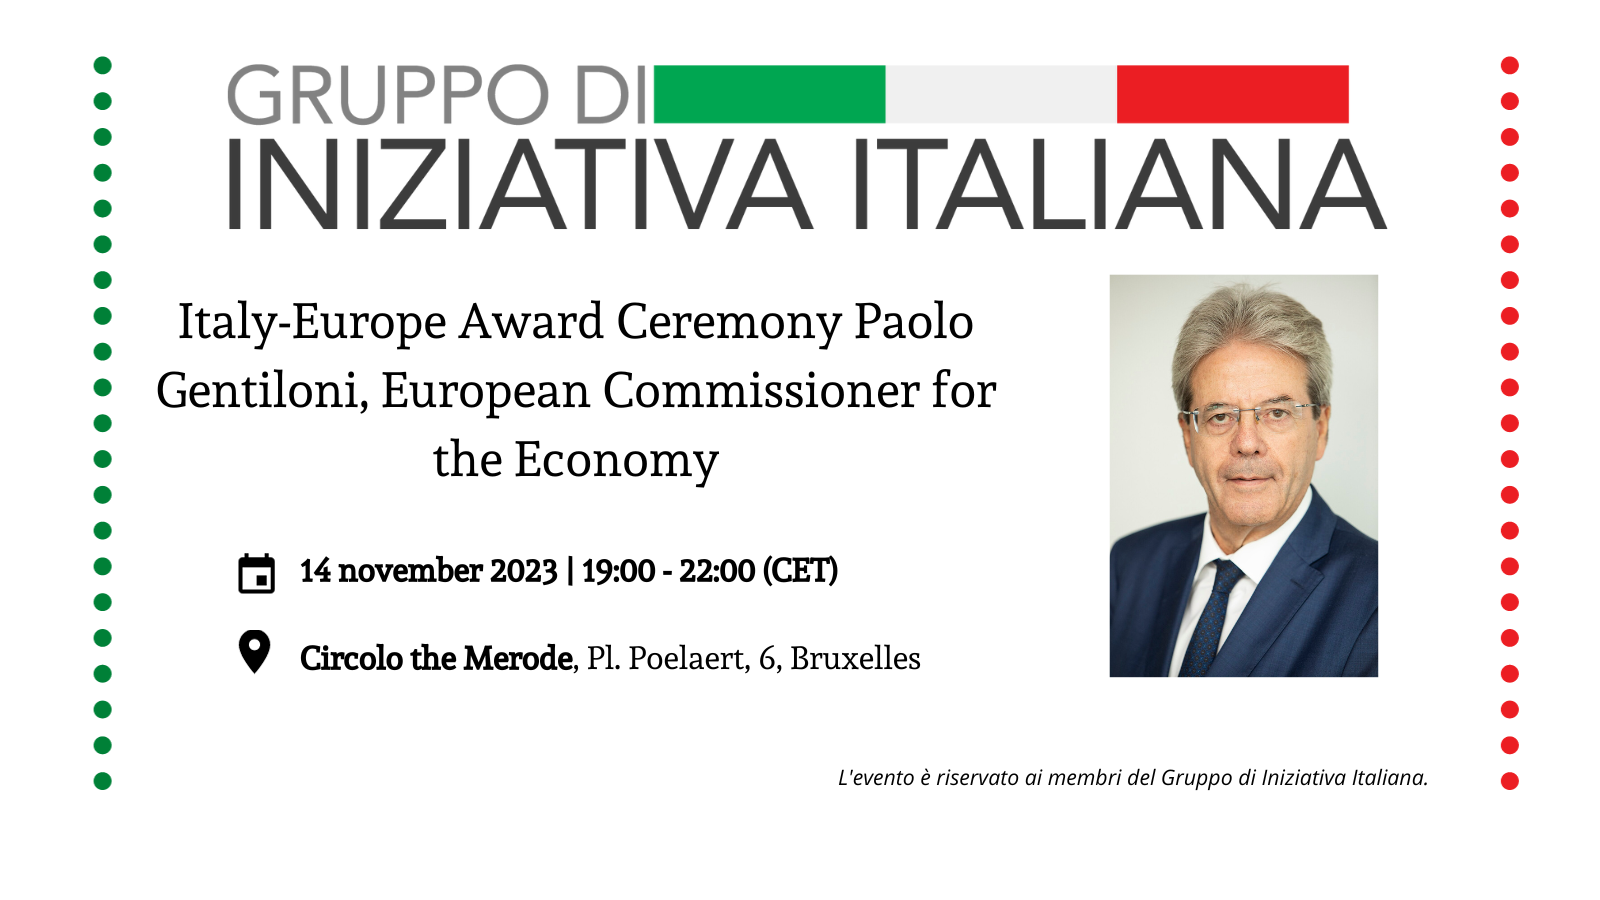 Italy-Europe Award Ceremony Paolo Gentiloni, European Commissioner for the Economy